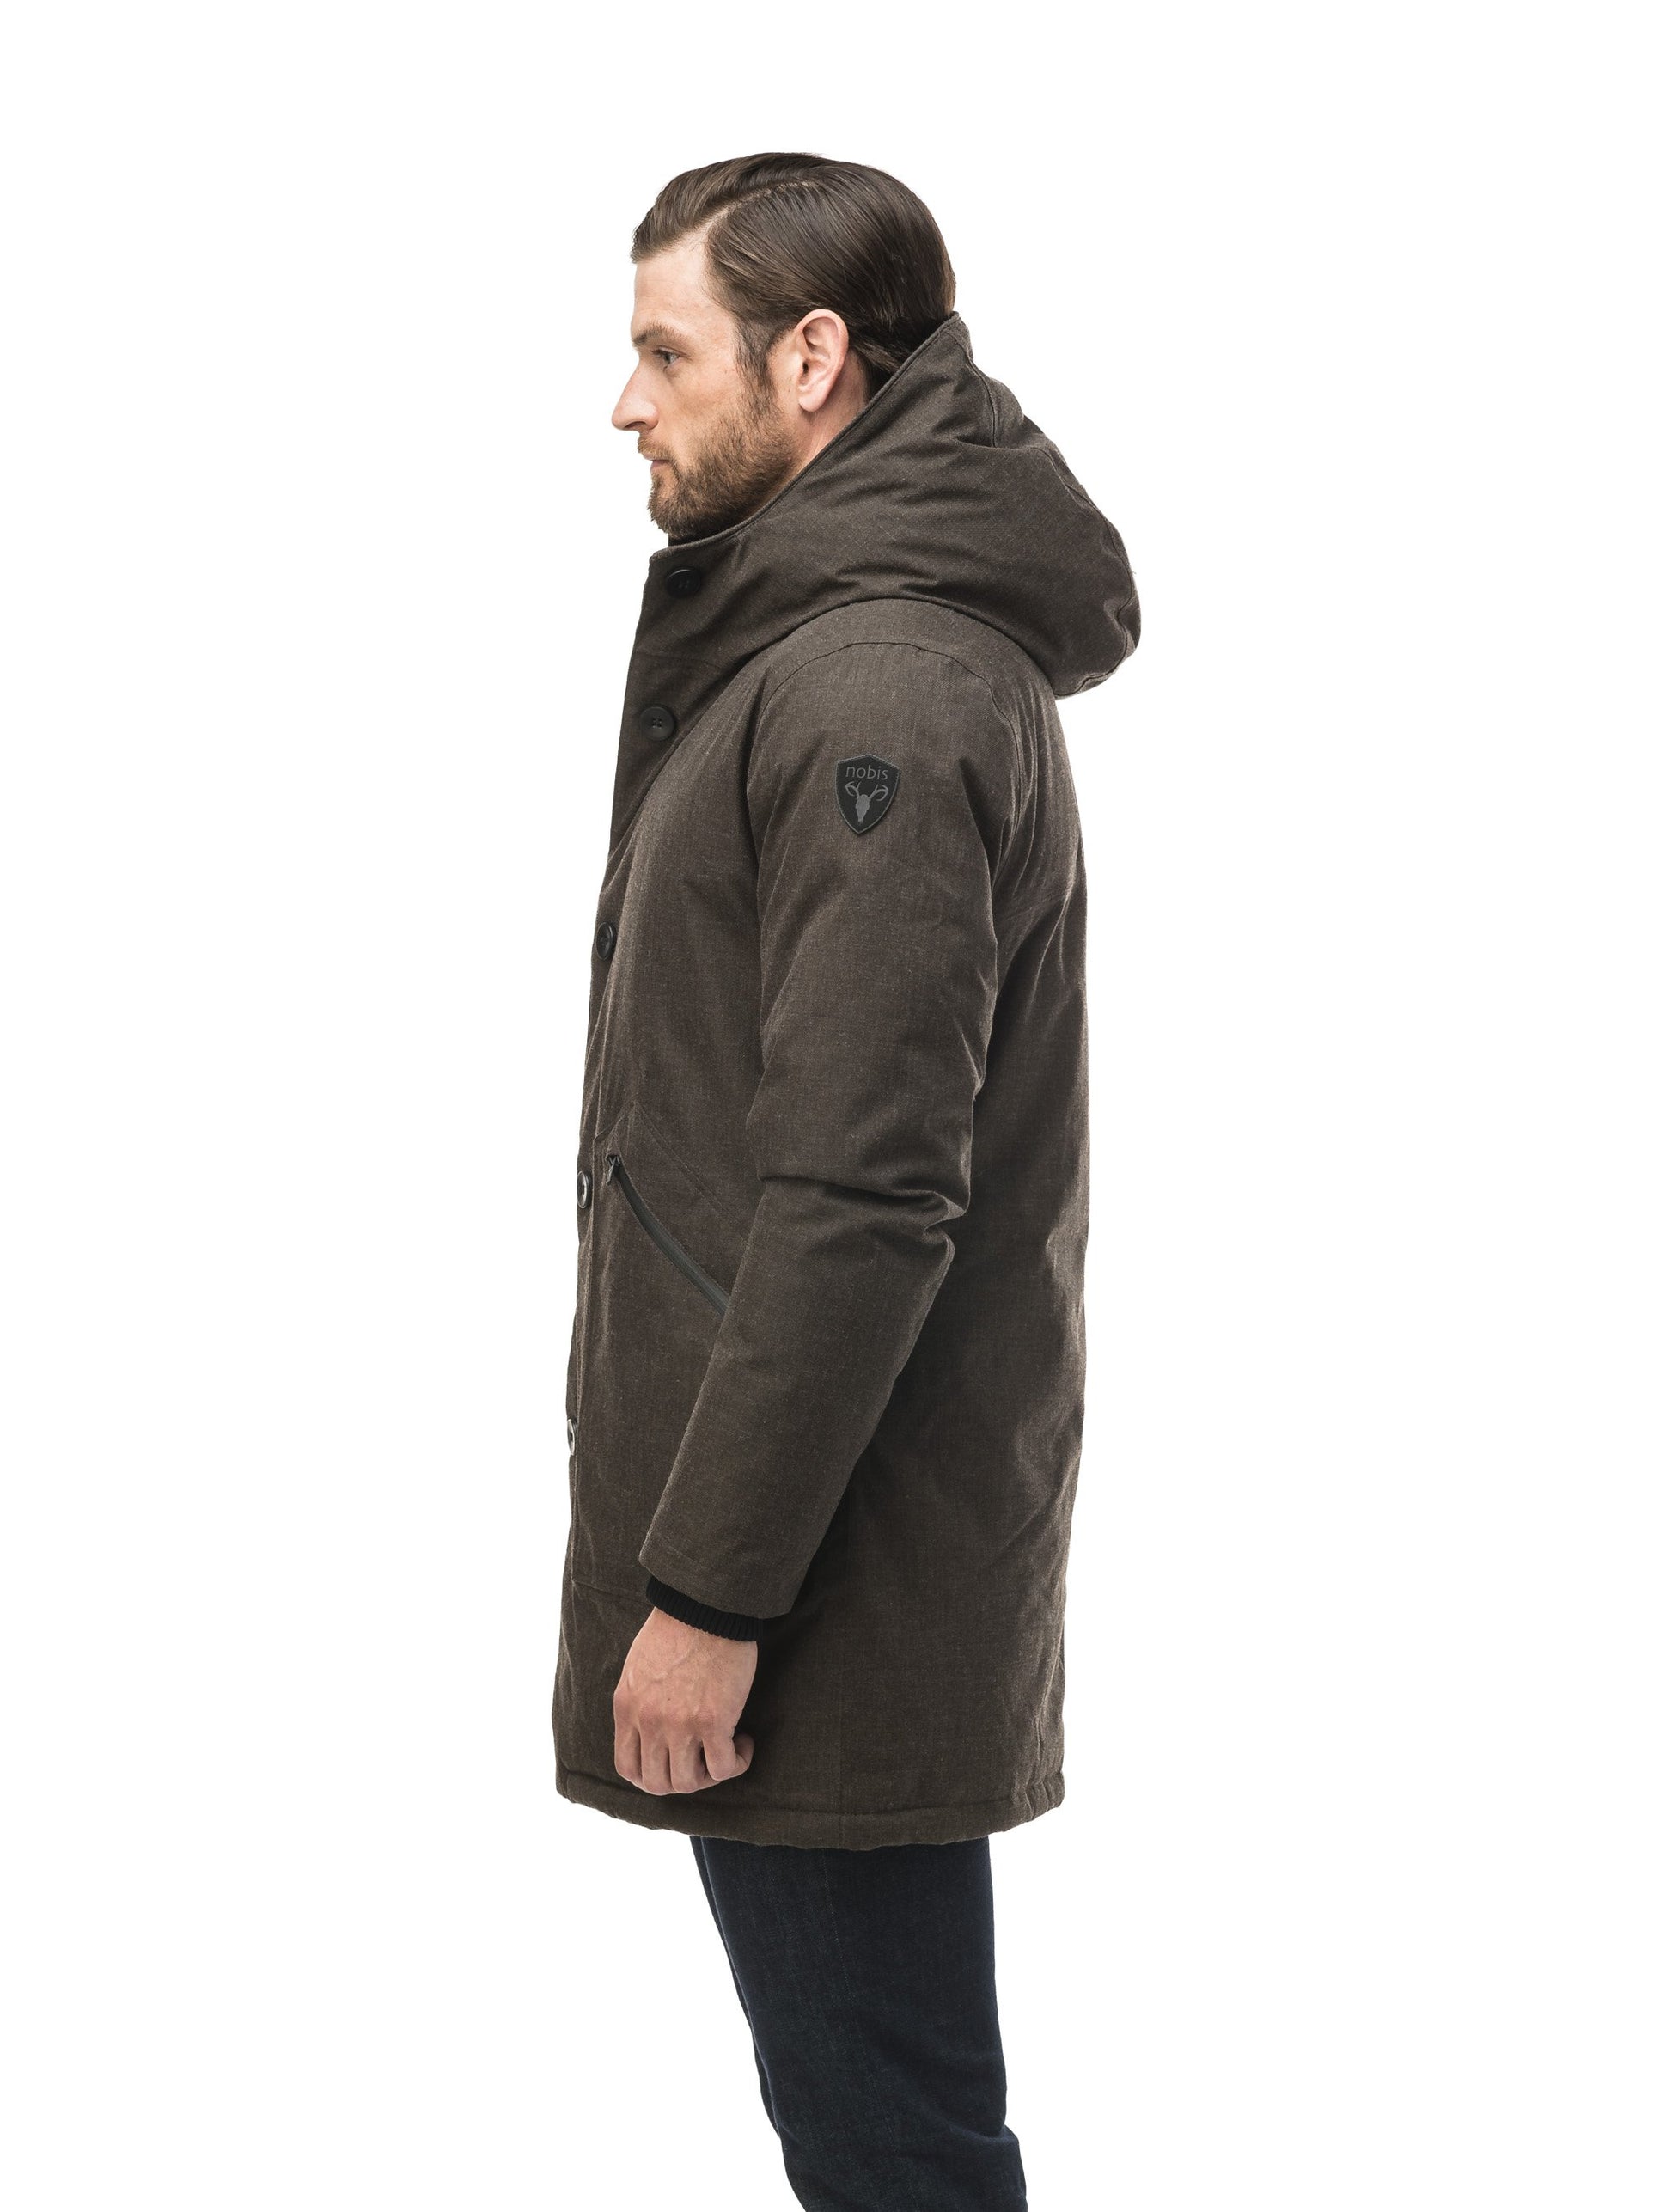 Men's fur free hooded parka with zipper and button closure placket featuring two oversized front pockets in H. Brown